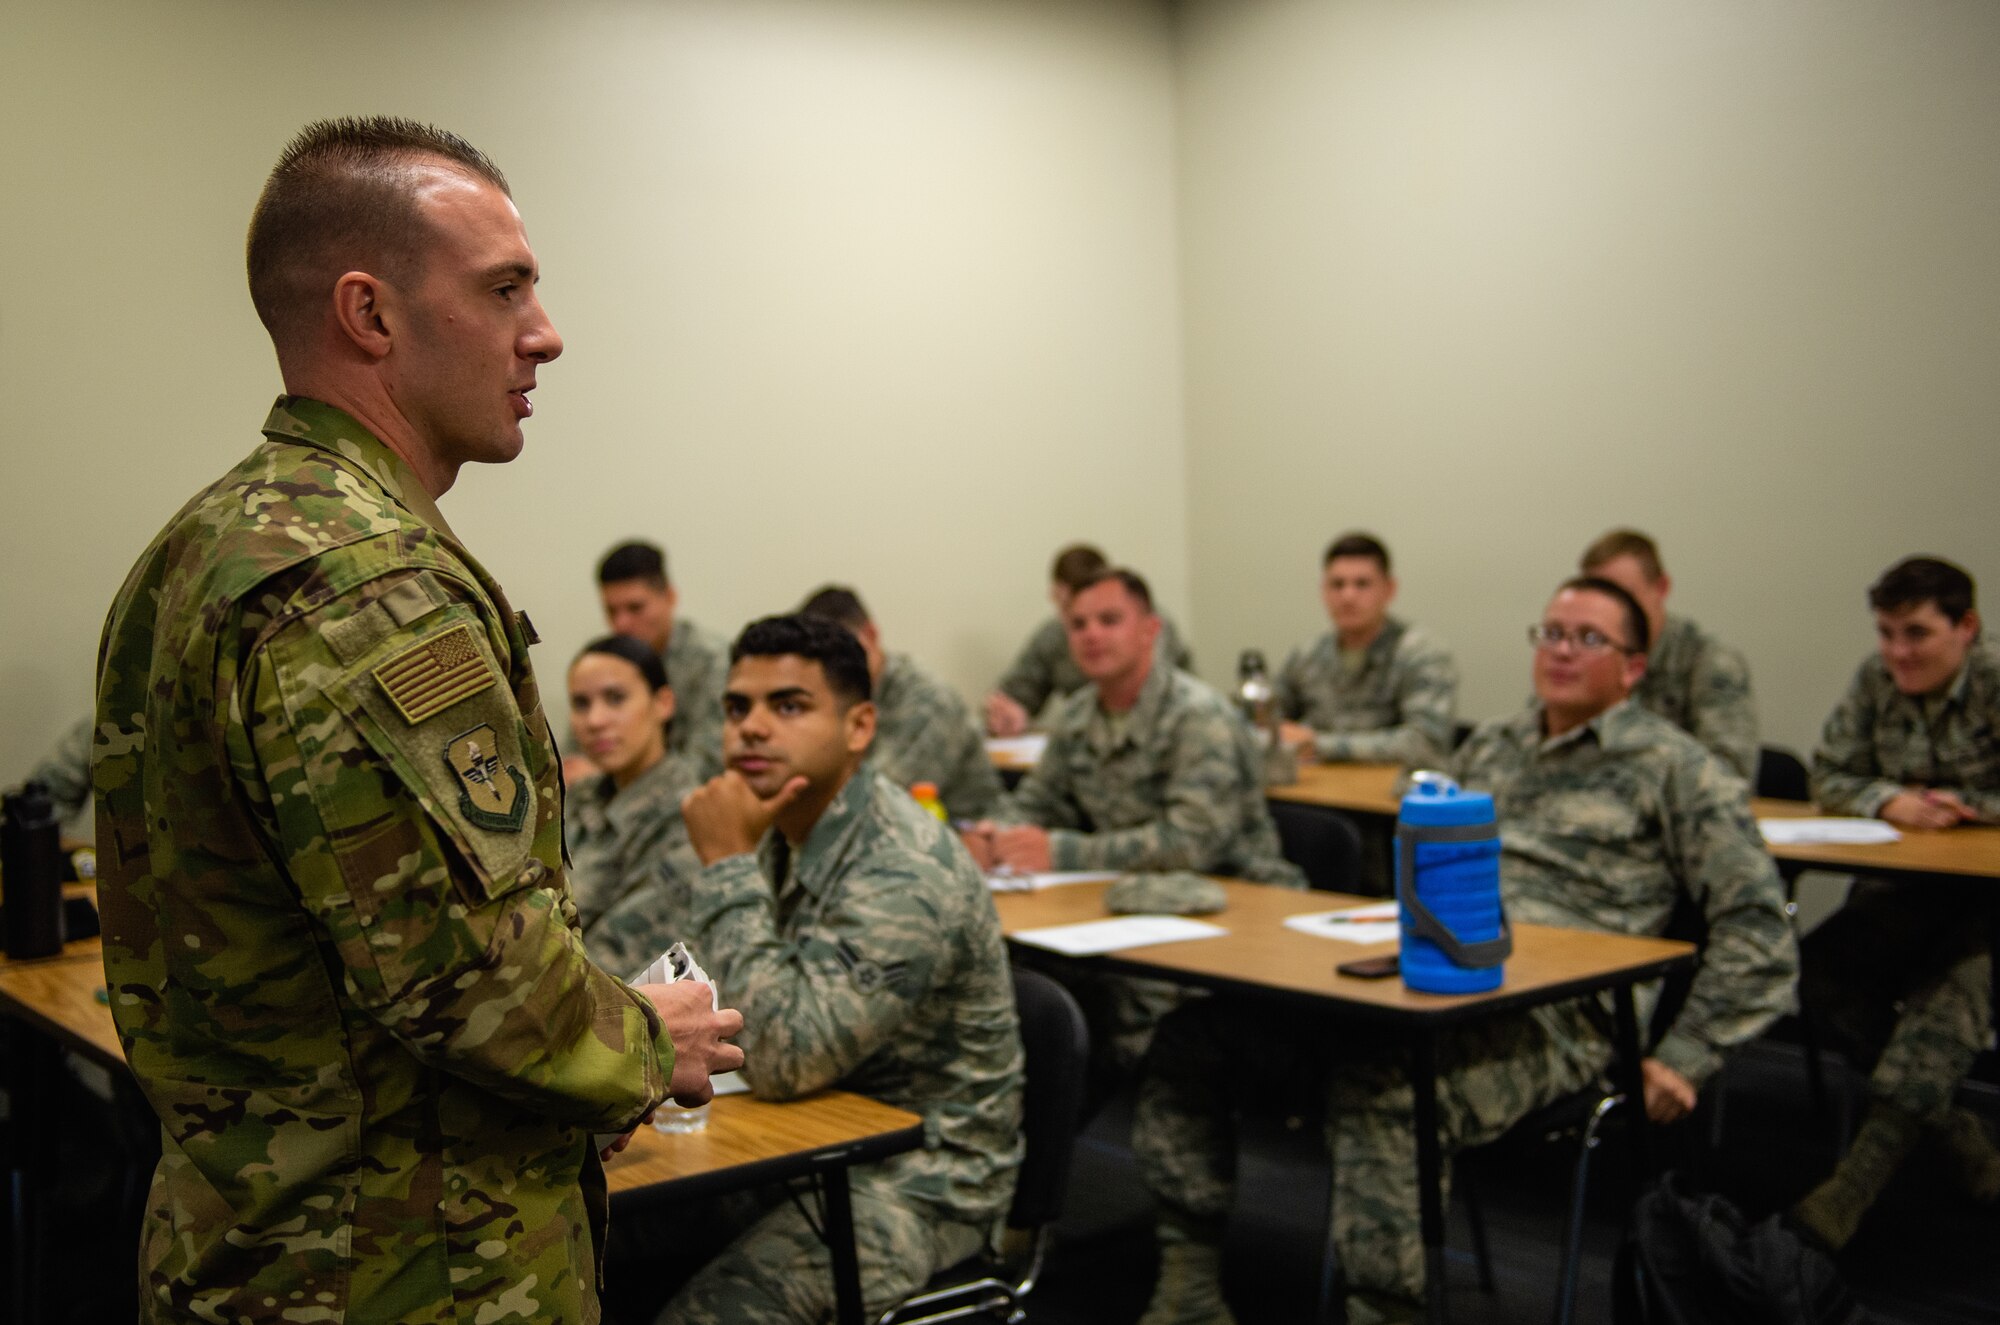 Tech Sgt. Kyle Wilson, First Term Airman Center NCO in charge, speaks to Airmen during an F-TAC Course Oct. 29, 2018, at Luke Air Force Base, Ariz. Luke AFB provides multiple professional development courses that not only provide valuable career information but also fosters an environment for Airmen to share their Air Force experiences amongst their peers. (U.S. Air Force photo by Senior Airman Alexander Cook)